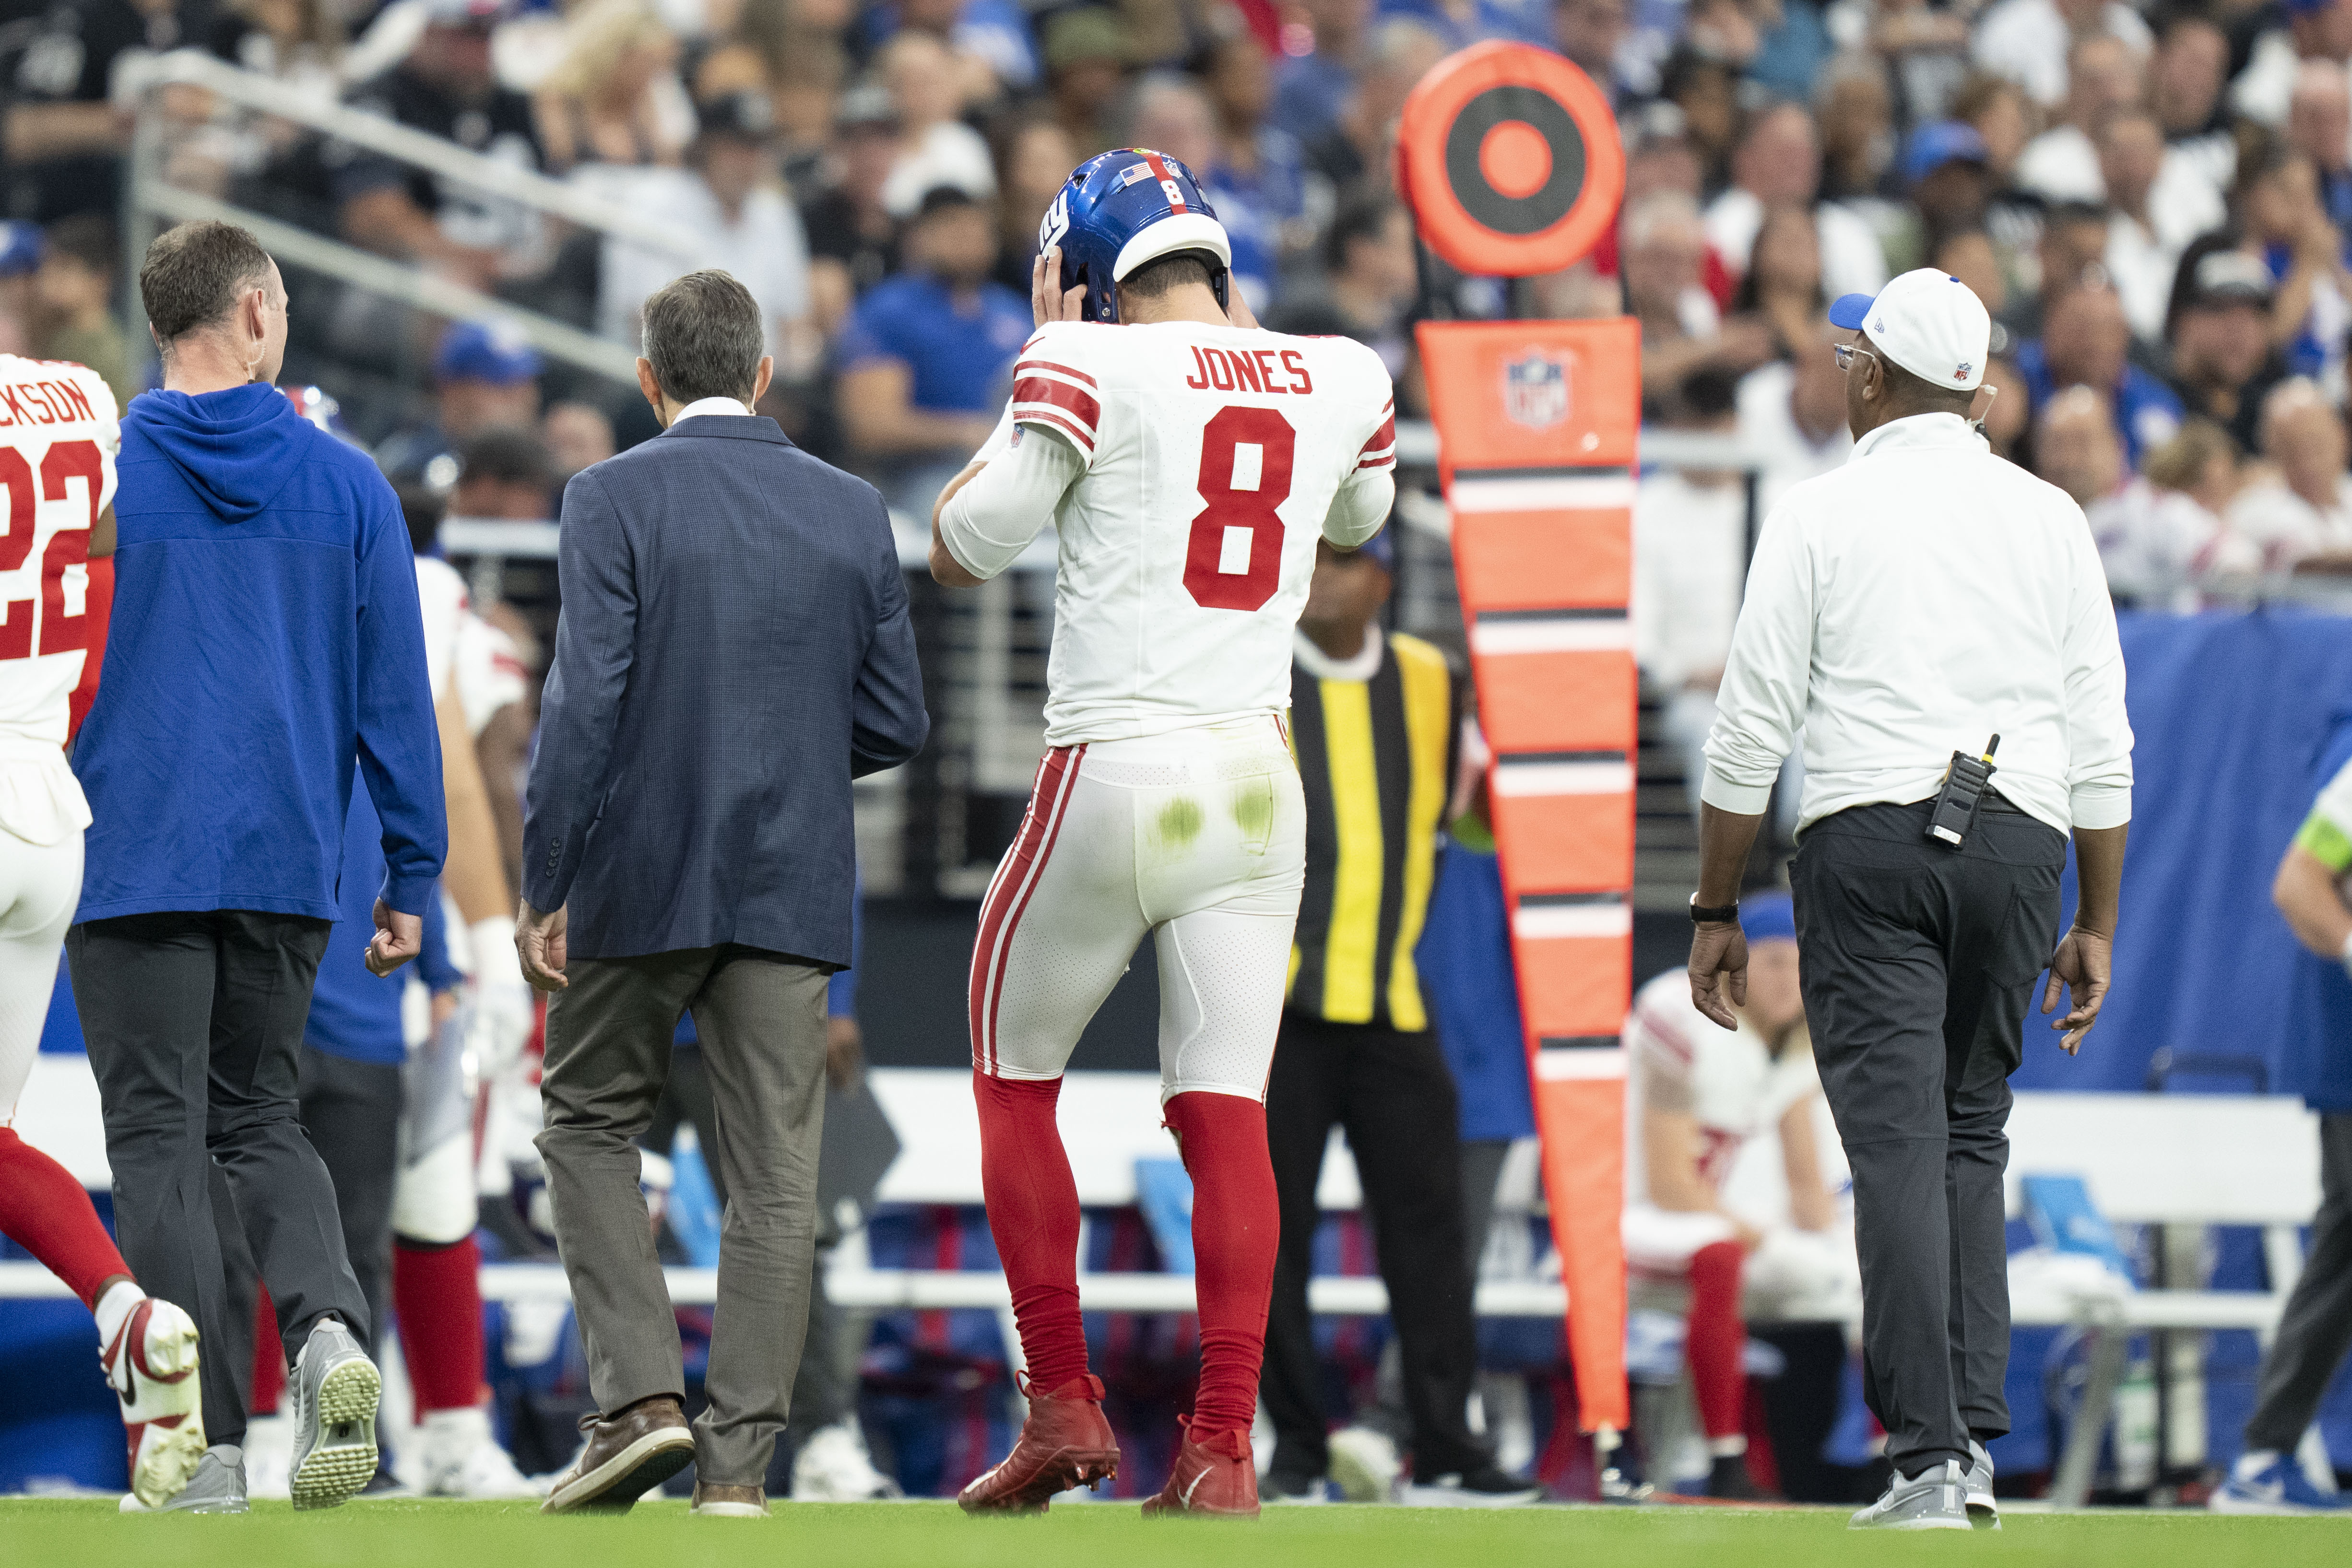 New York Giants quarterback Daniel Jones (8) walks to the sideline after an injury against the Las Vegas Raiders during the second quarter at Allegiant Stadium